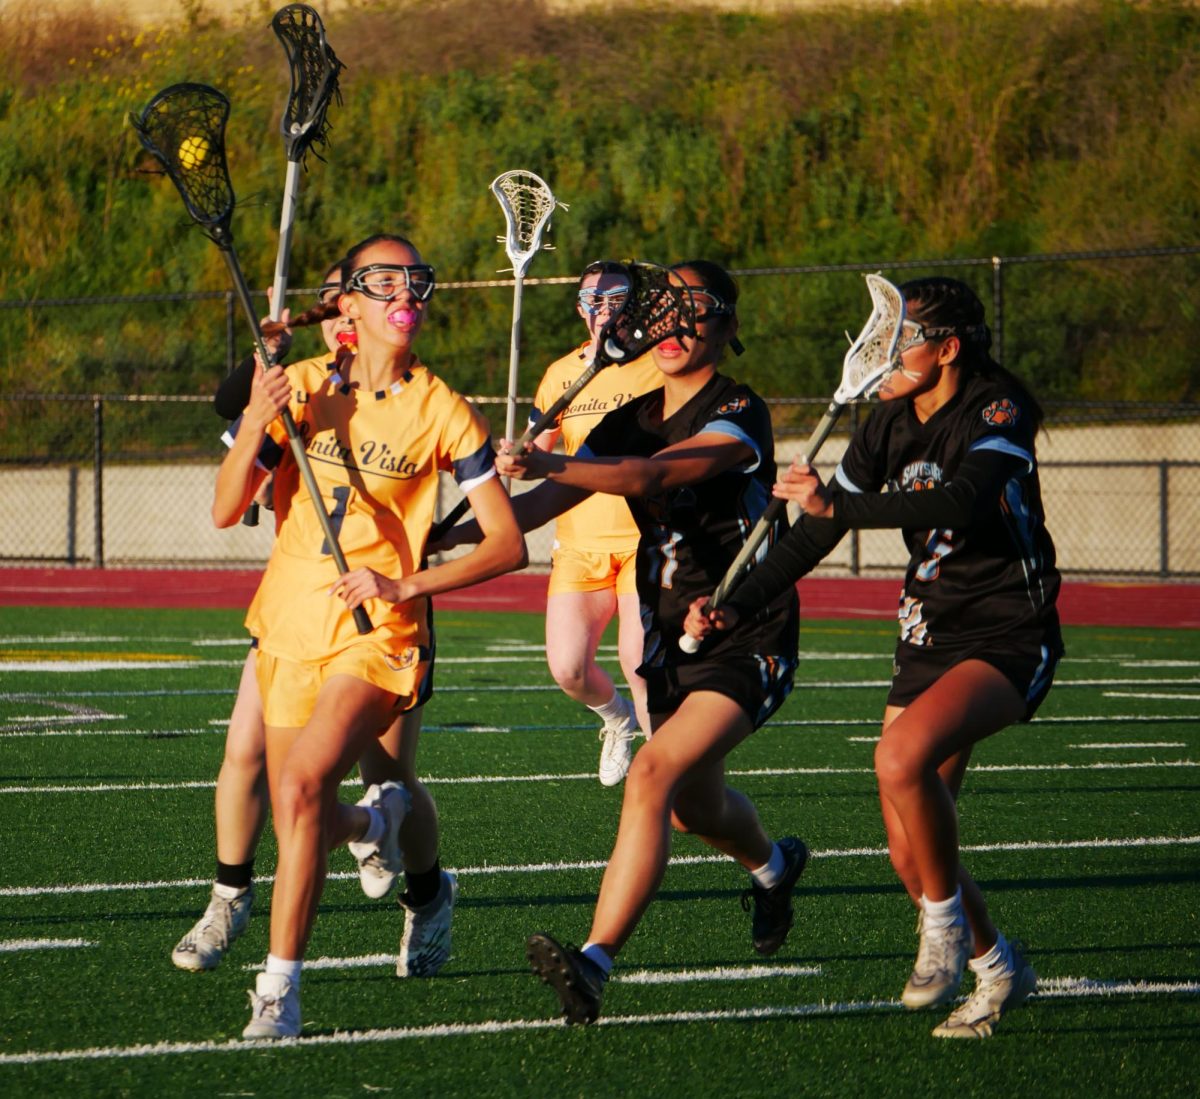 On March 1, the Bonita Vista High (BVH) girls lacrosse team plays against San Ysidro High (SYH). The Lady Barons take the ball and travel downfield in the hopes of scoring.
